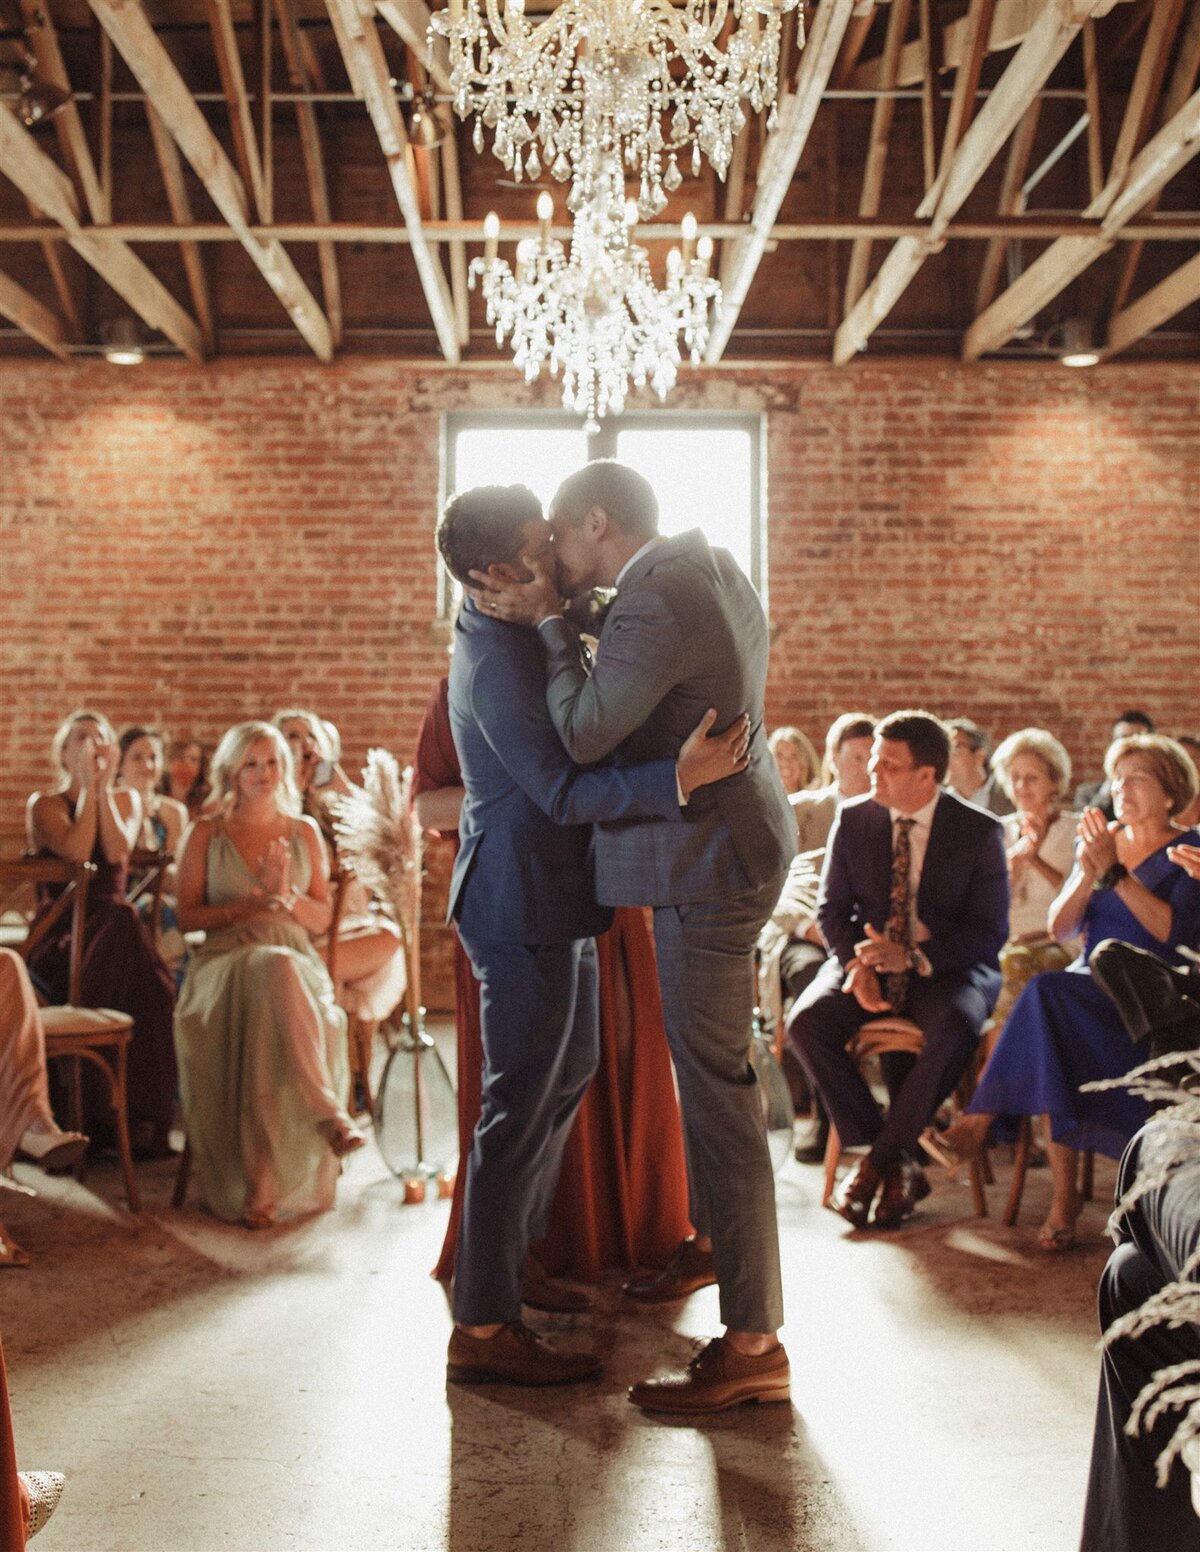 Grooms kissing after wedding ceremony at The St Vrain, Longmont wedding venue